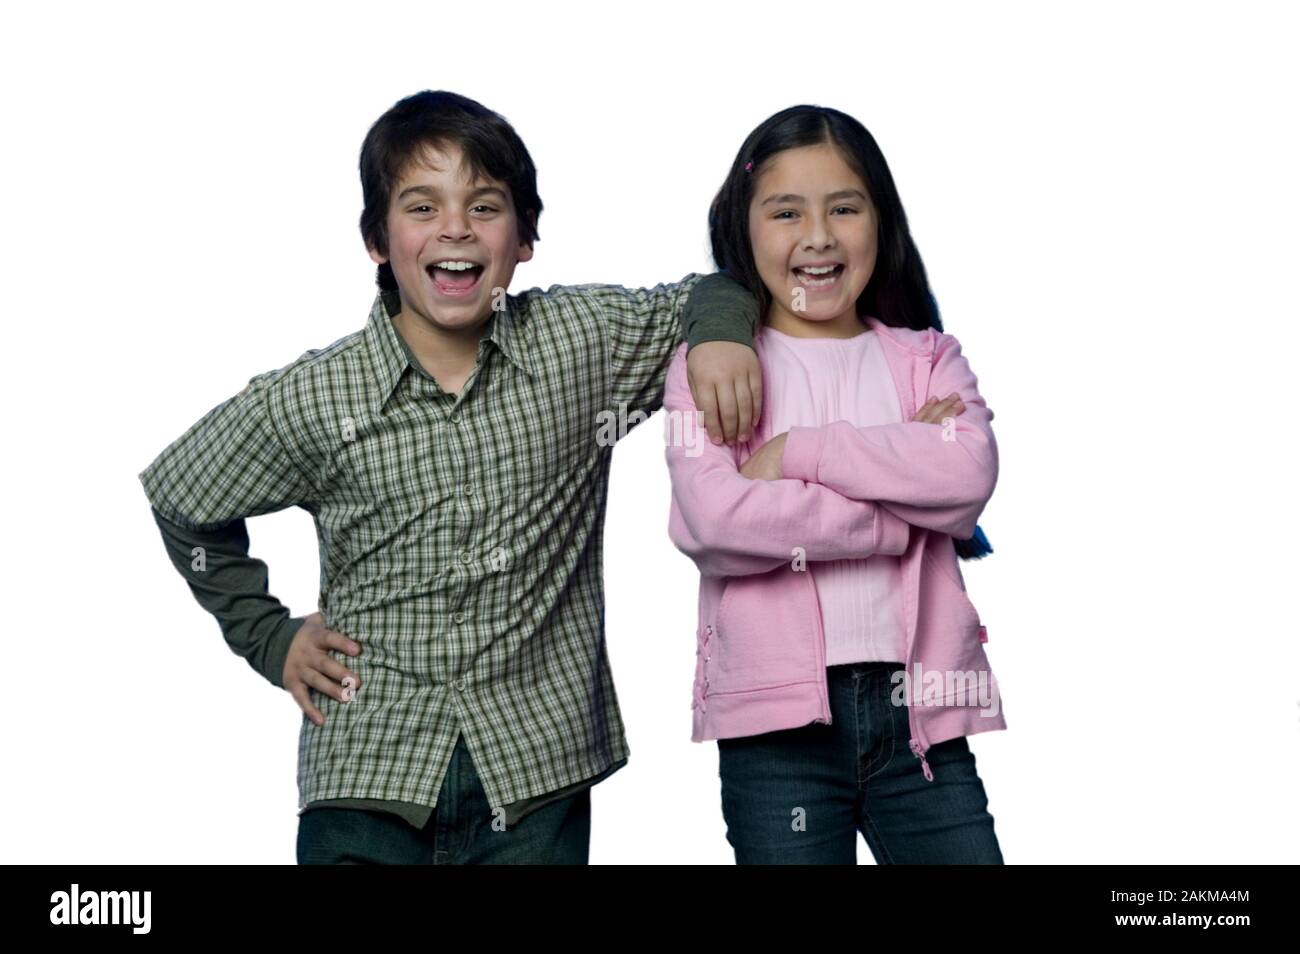 Young Caucasian boy and girl best friends portrait on a white background Stock Photo